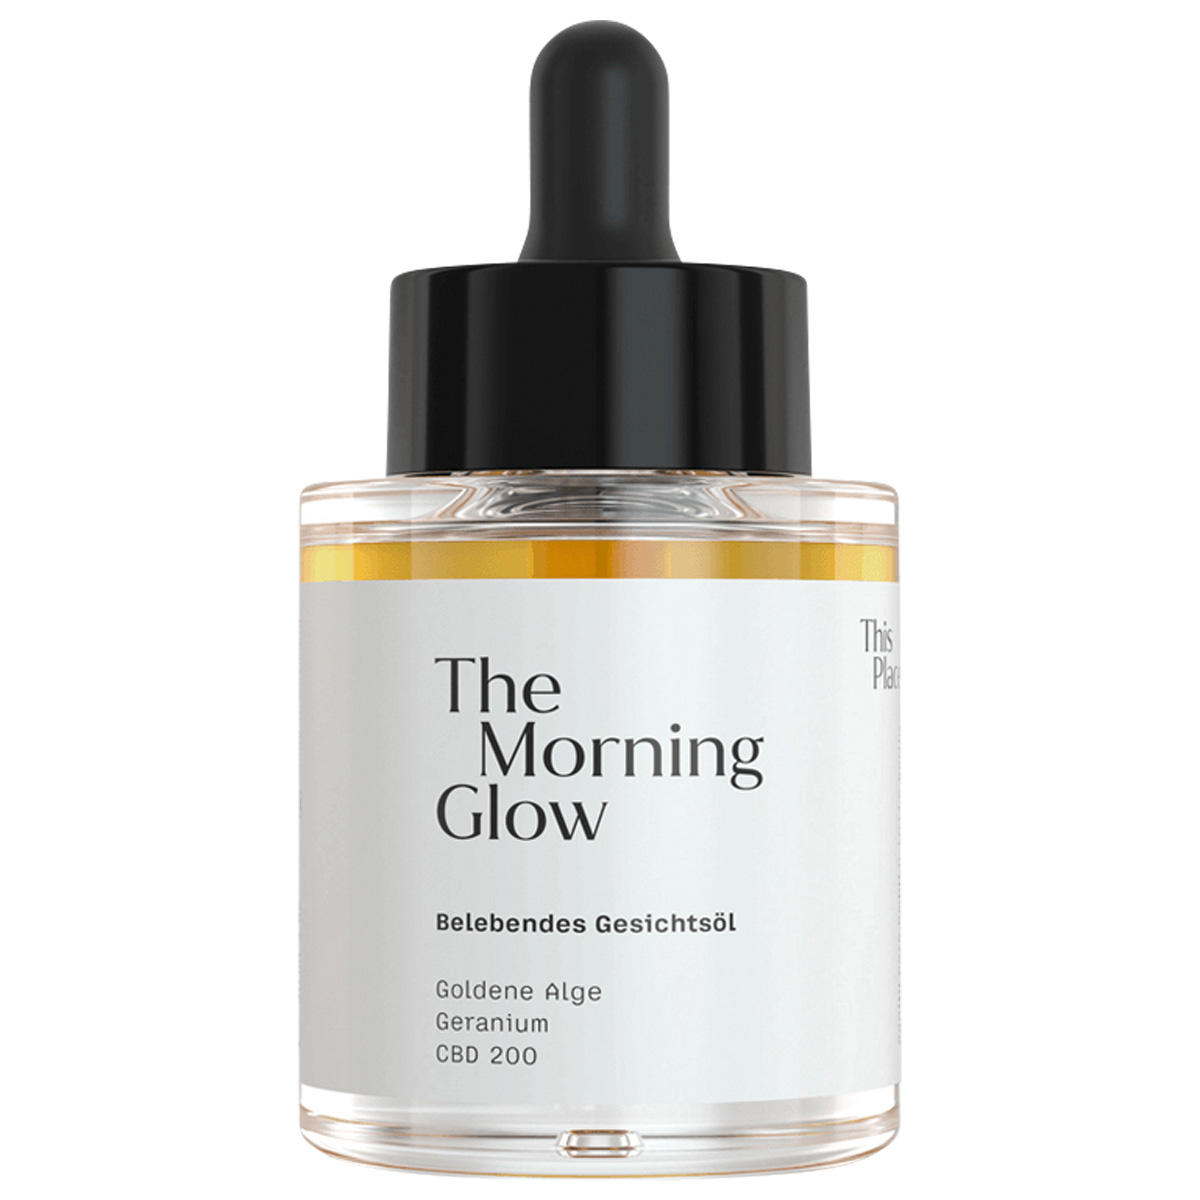 This Place The Morning Glow 30 ml - 1